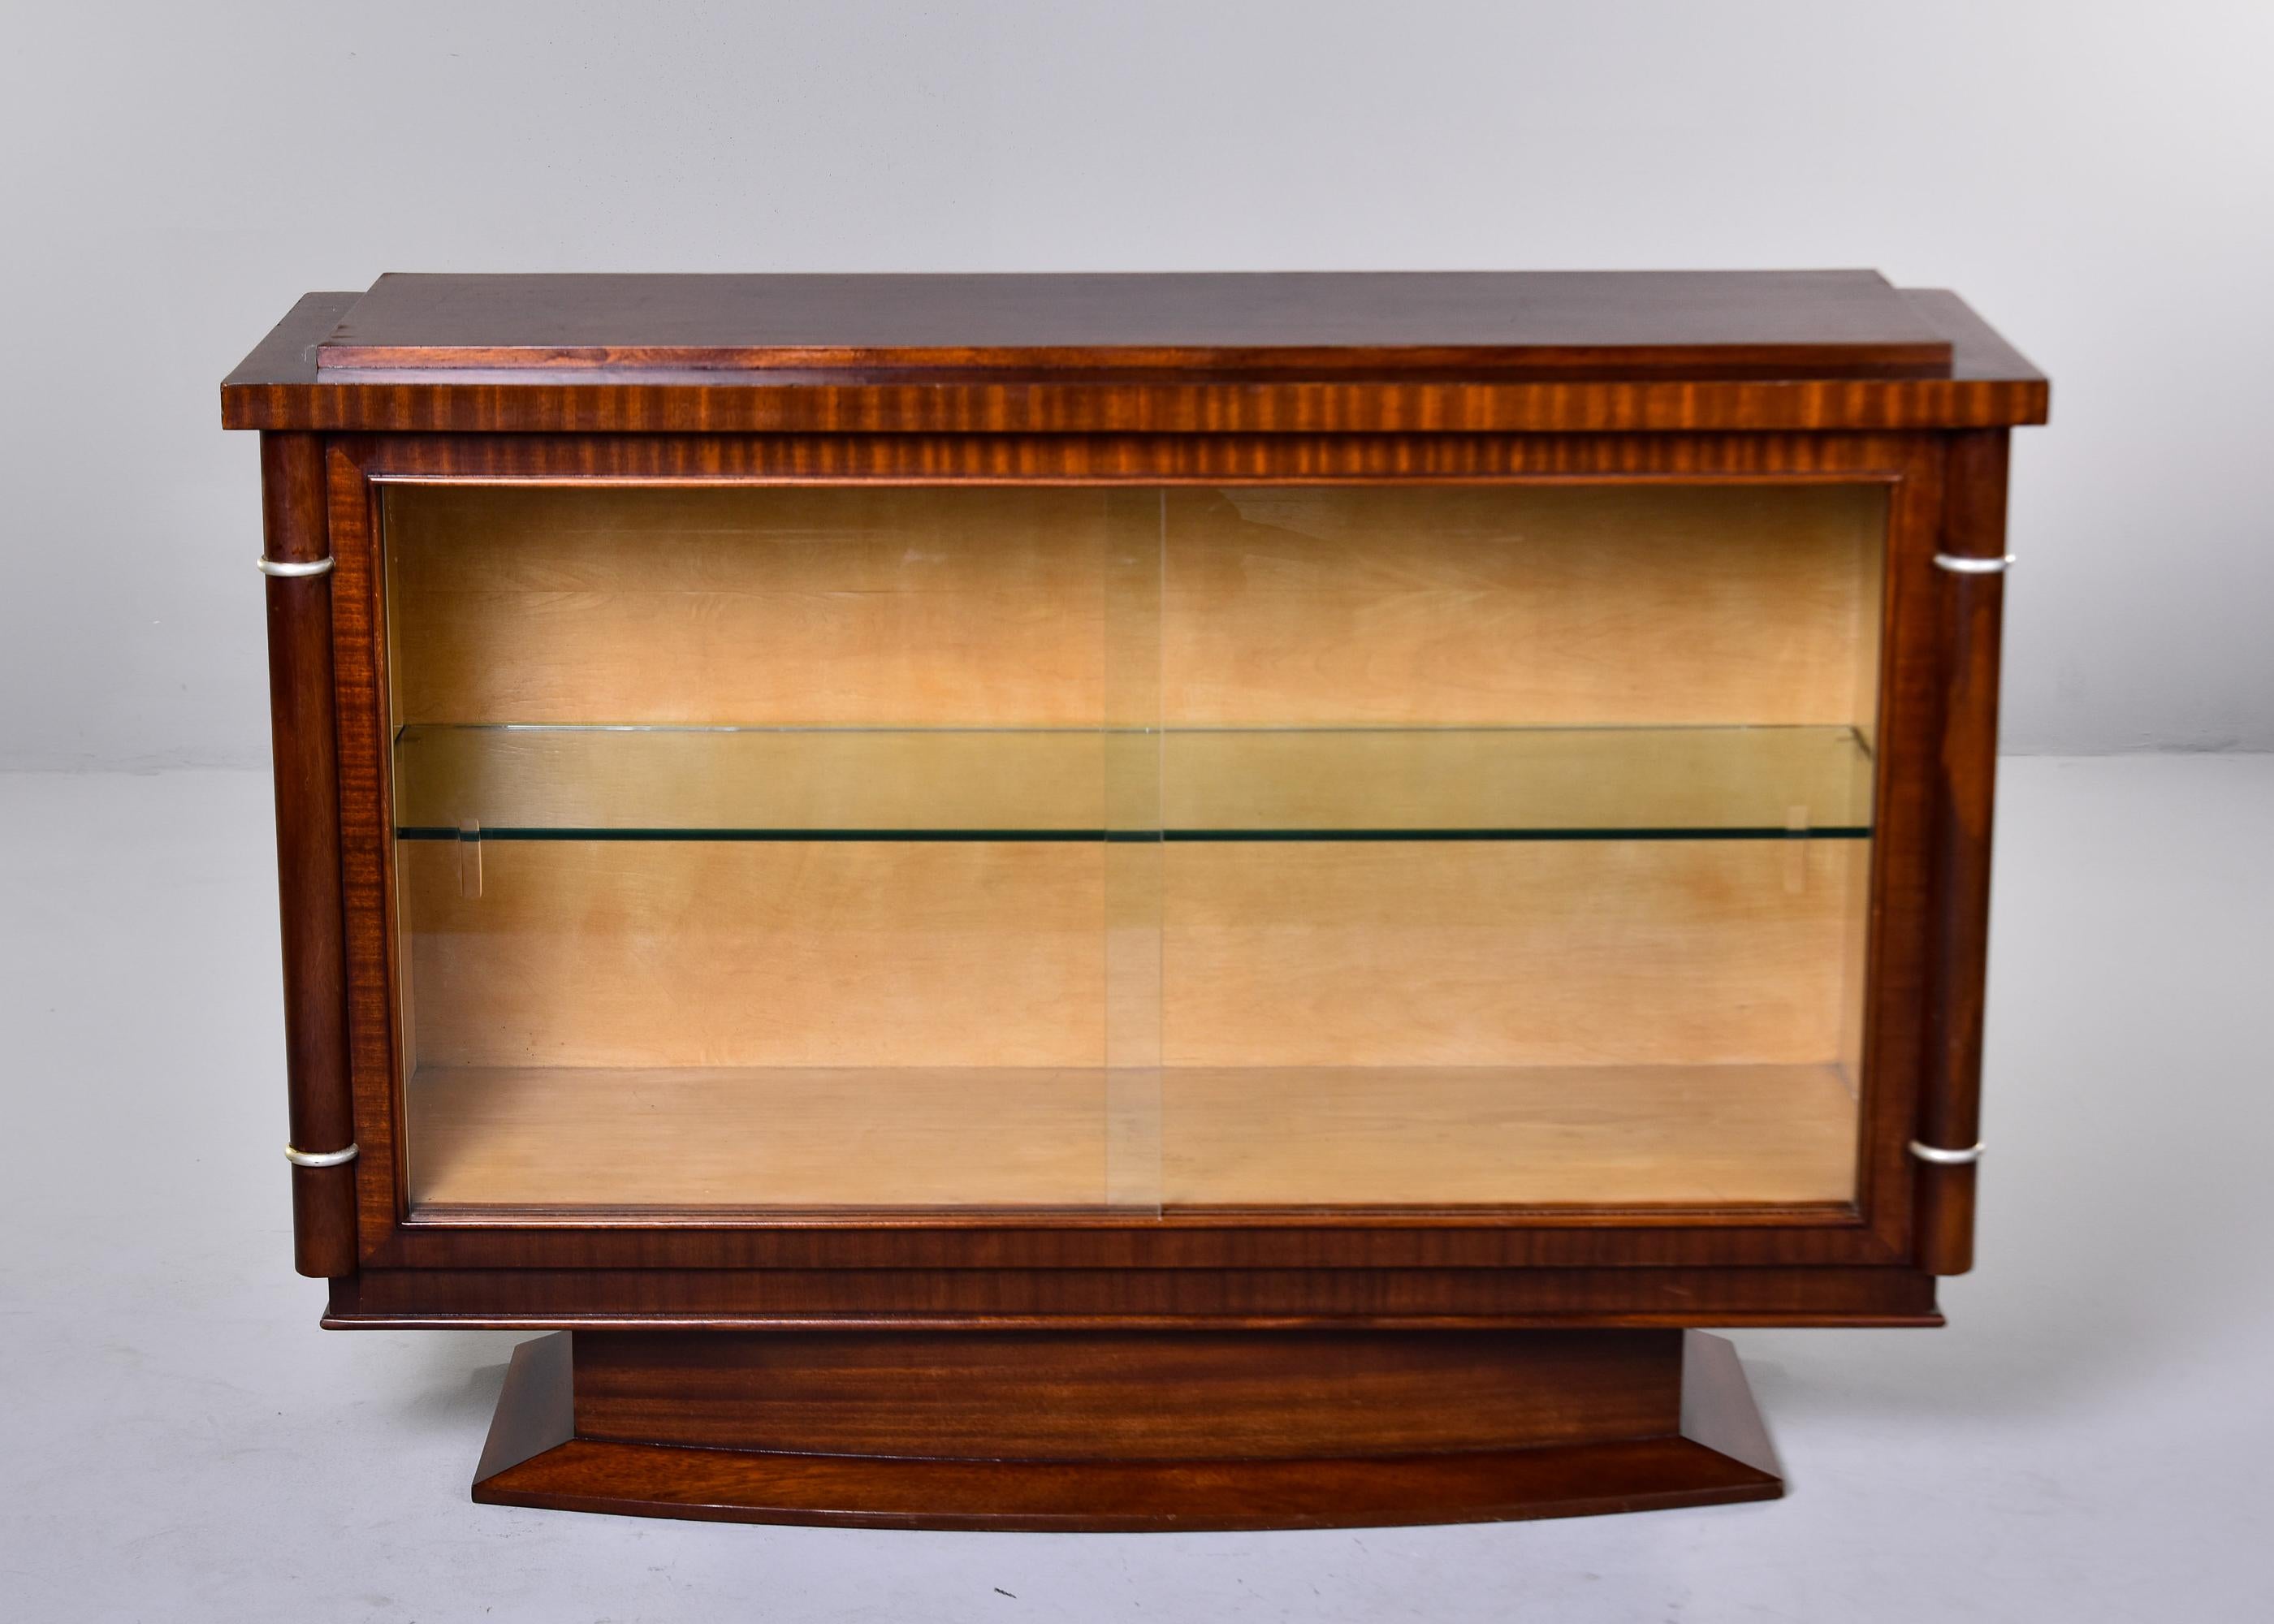 1930s glass display cabinet